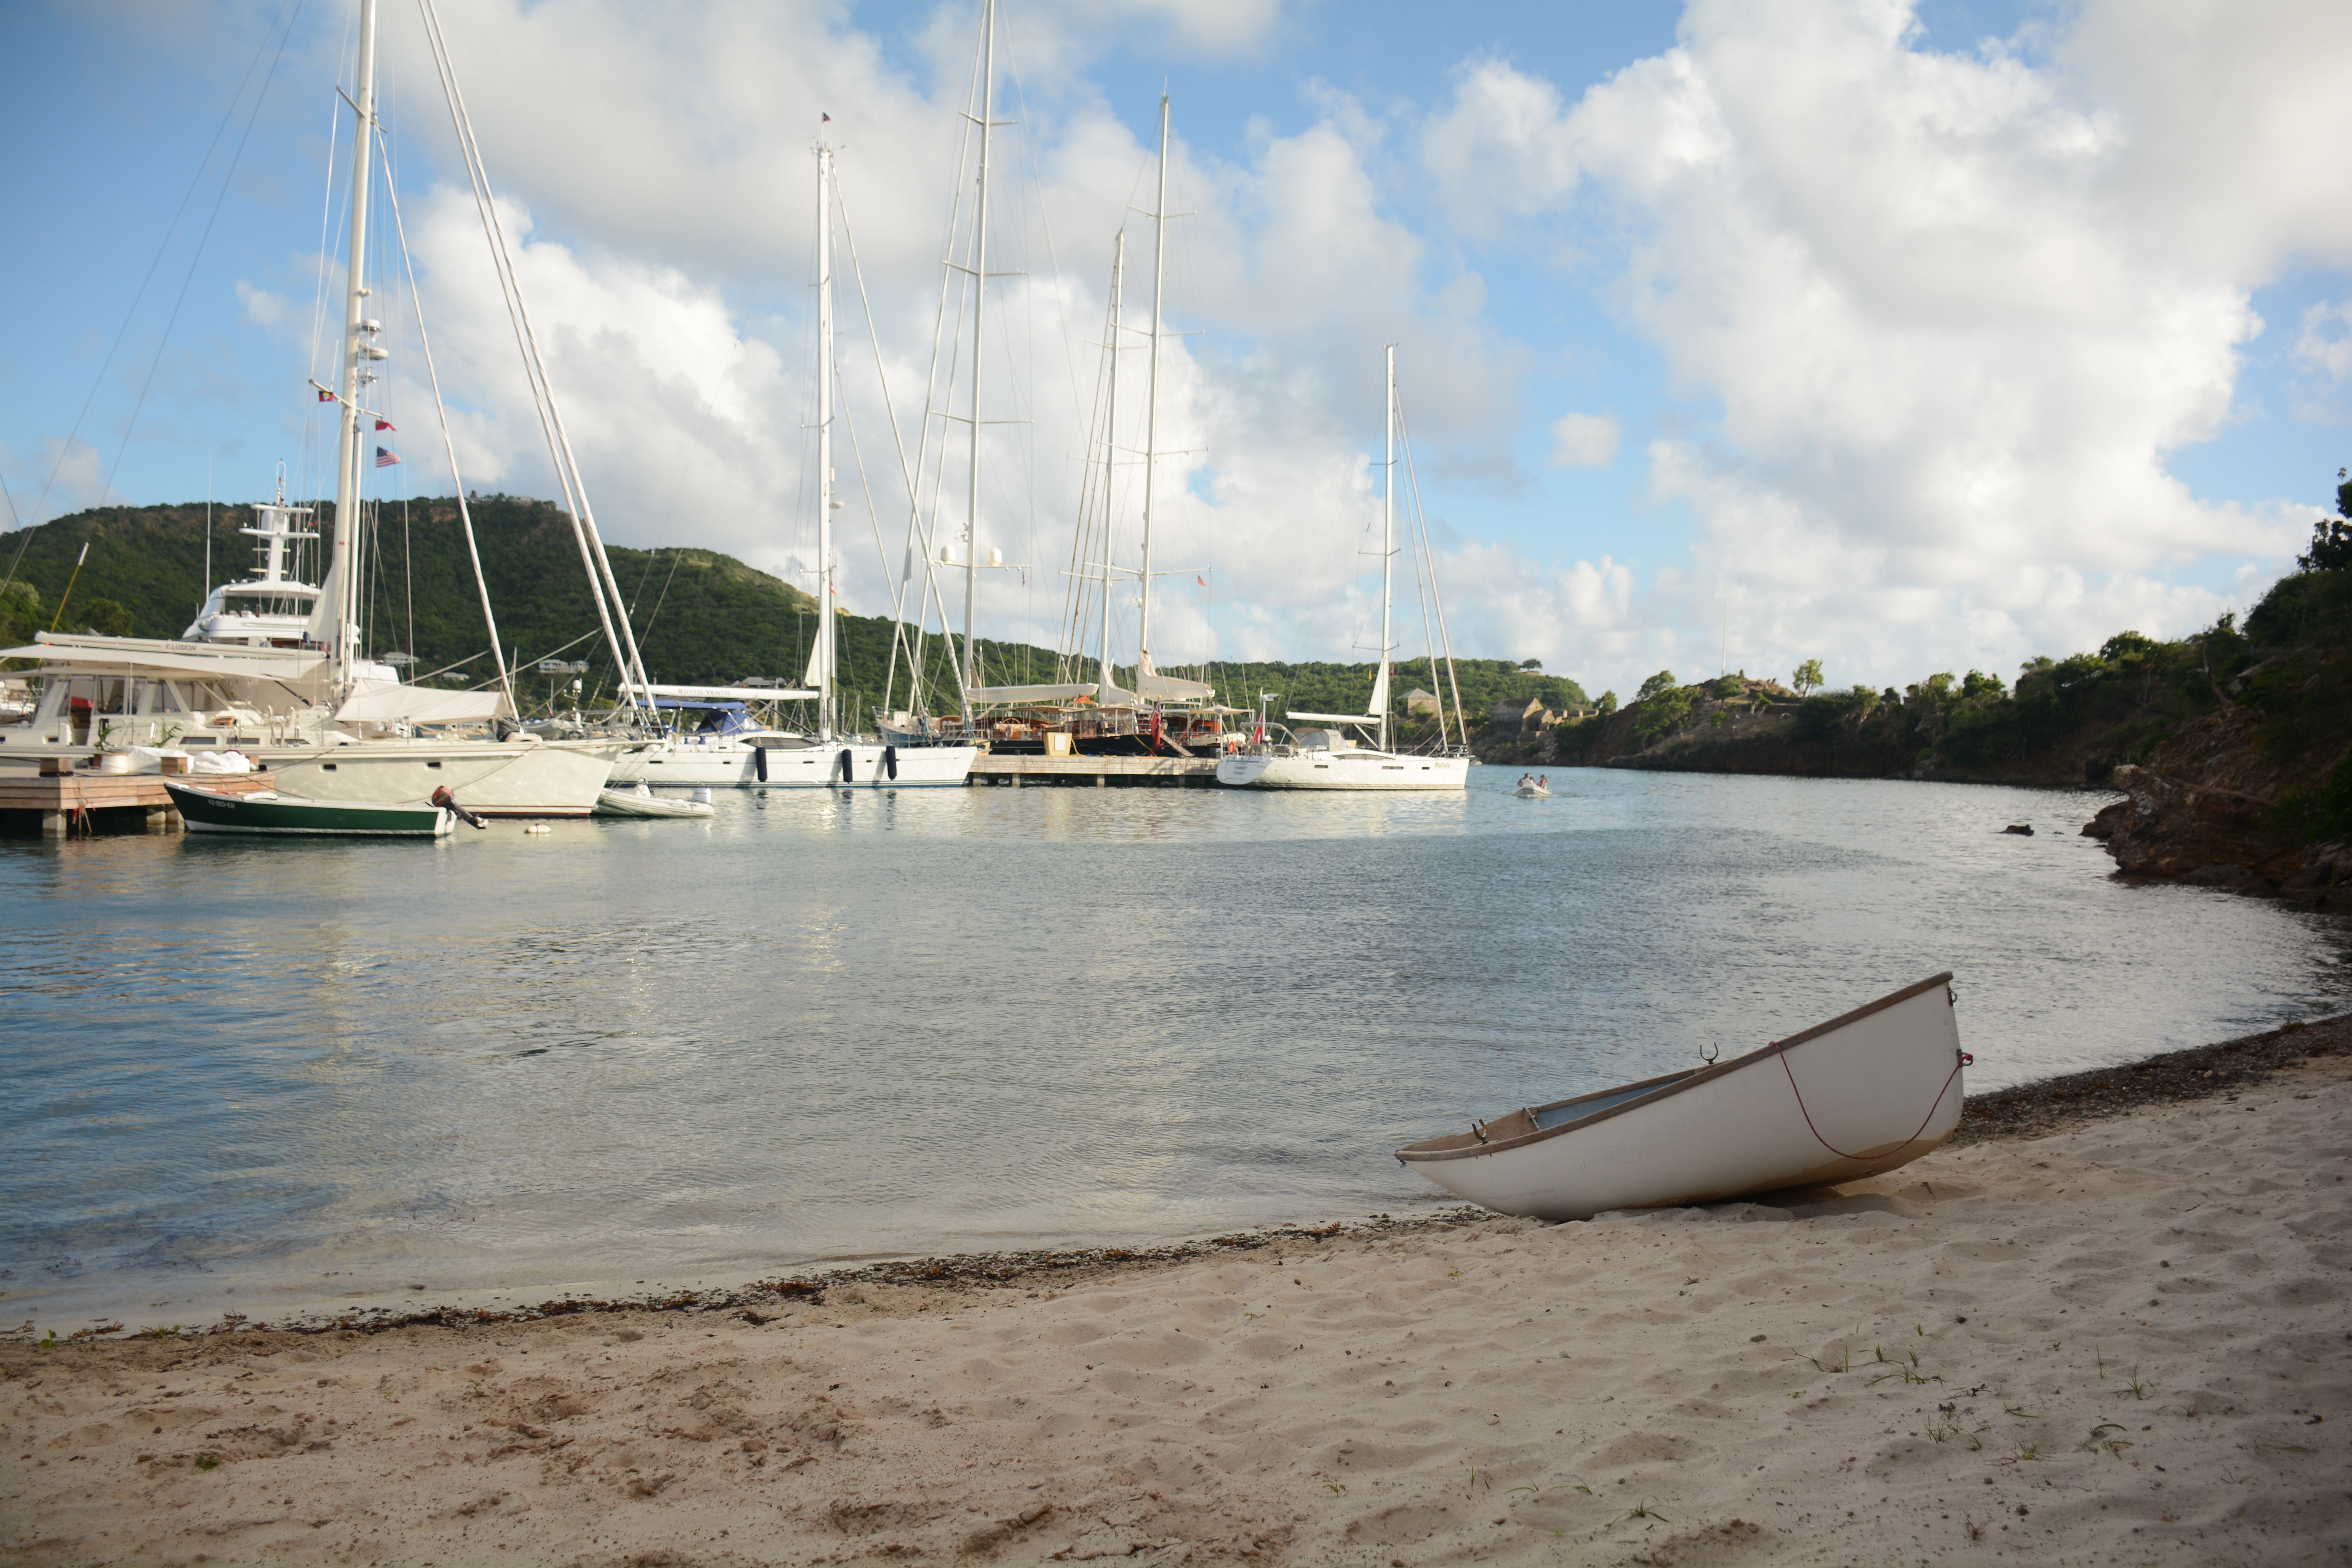 image of beach with sailboats docked in the background.